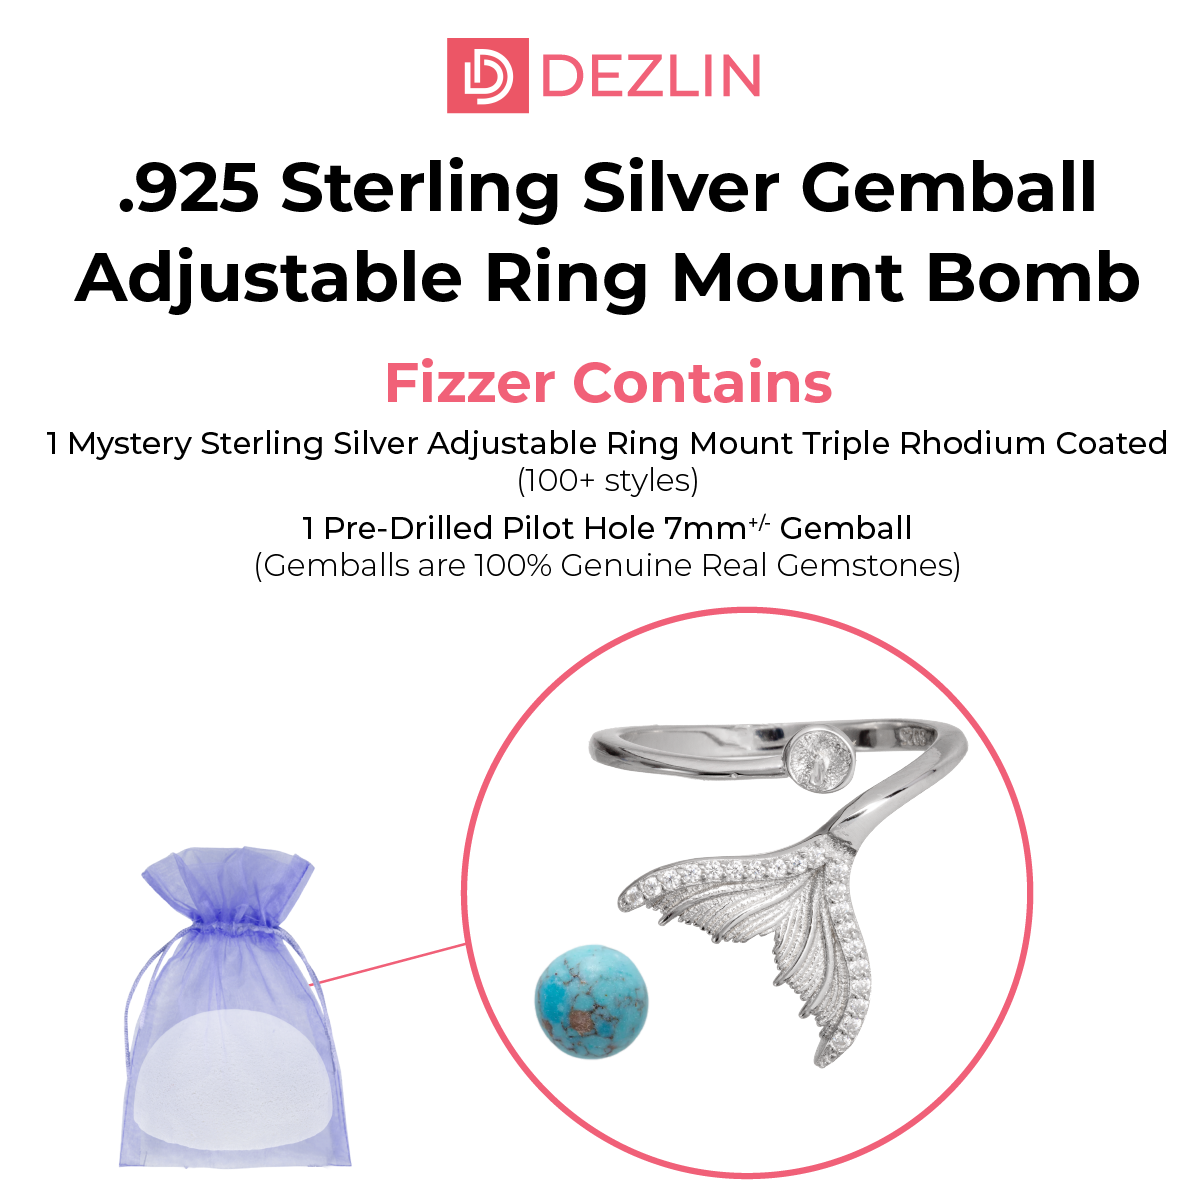 Ring Bomb - Gemball DIY Mount Adjustable Ring 925 Sterling Silver Rhodium Coated (100+ Styles)